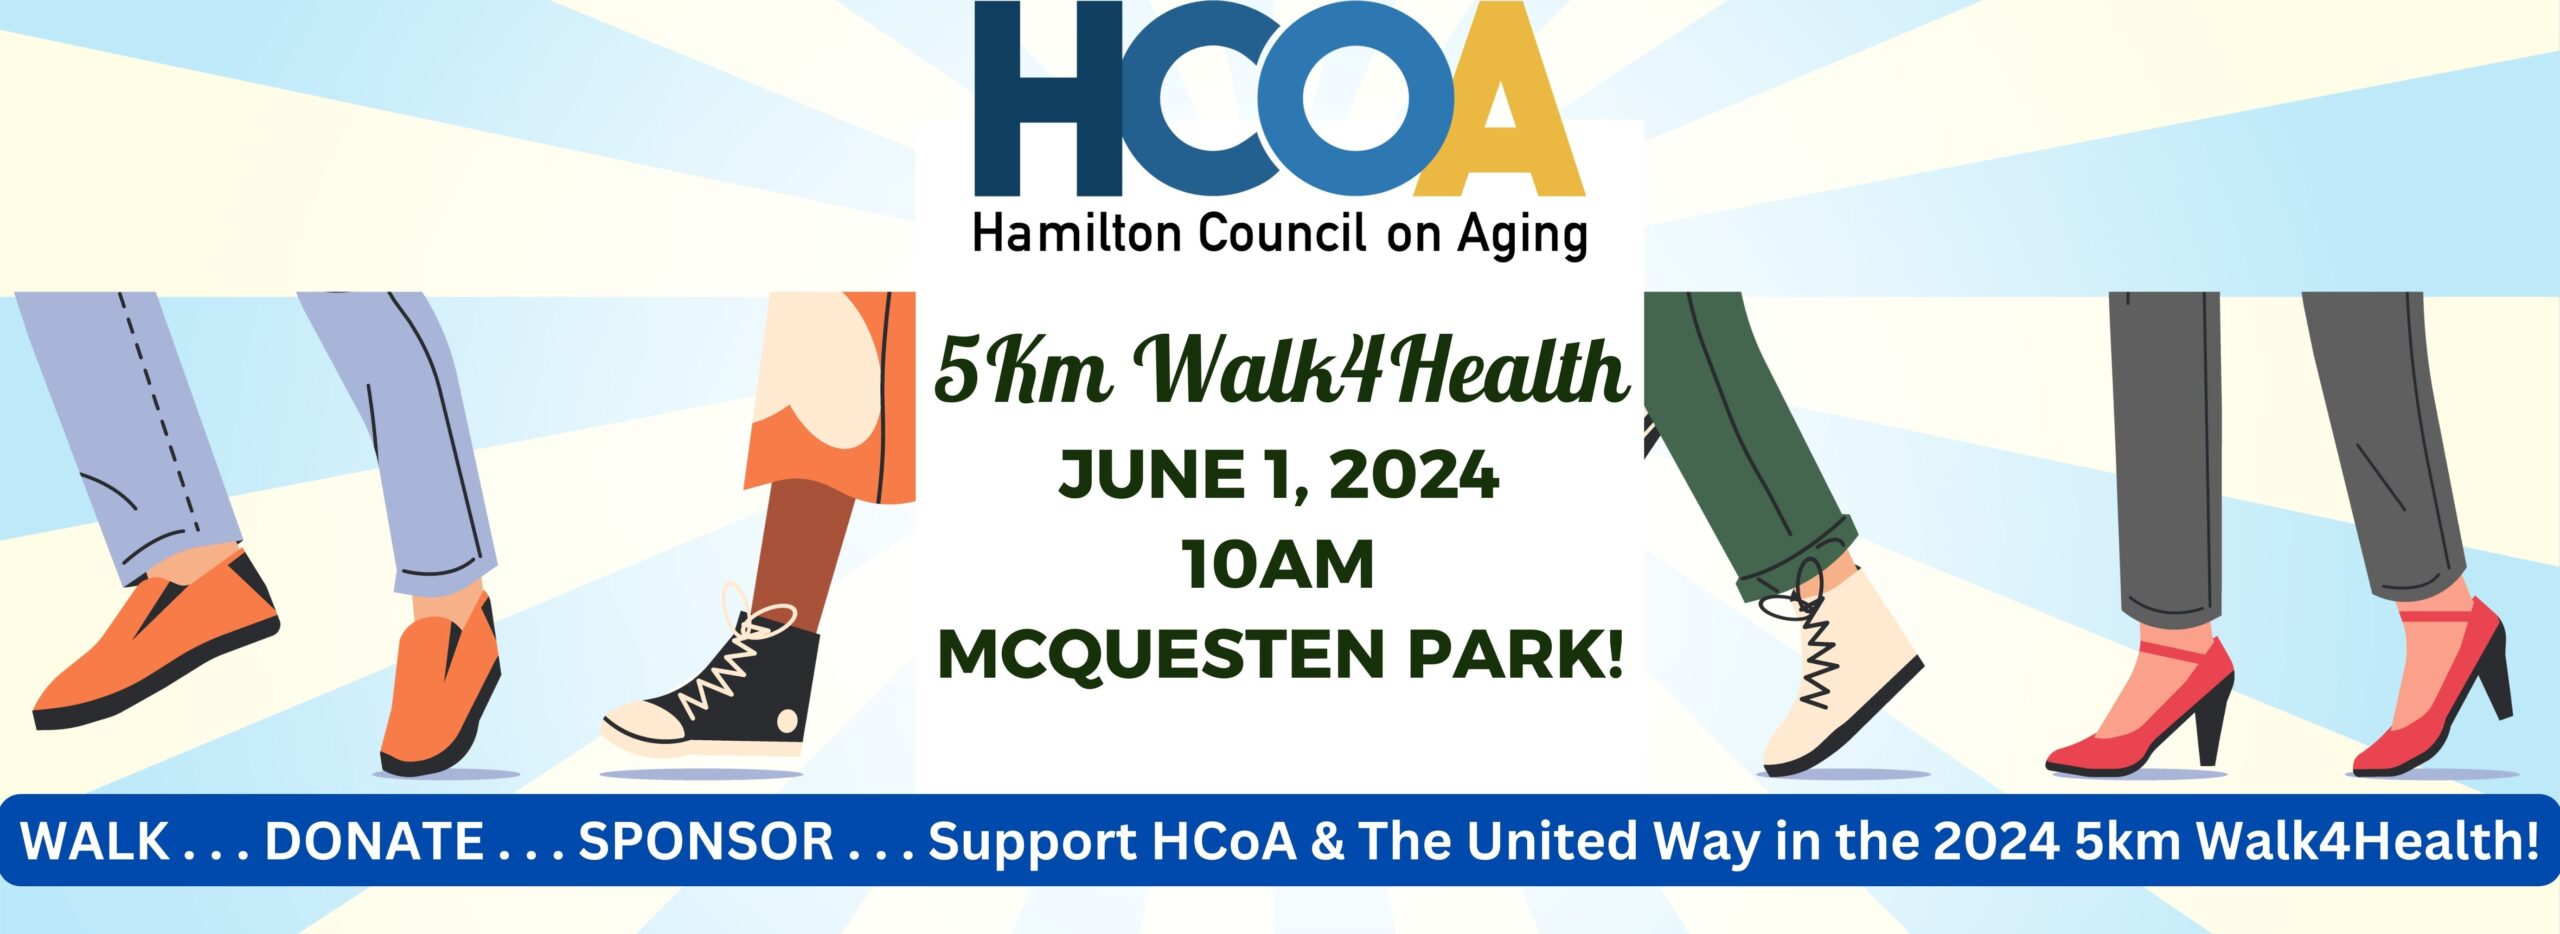 Support HCoA's 2024 5KM Walk4Health- June 1, 10am at TB McQuesten Park. Donate, Sponsor or Walk with us!